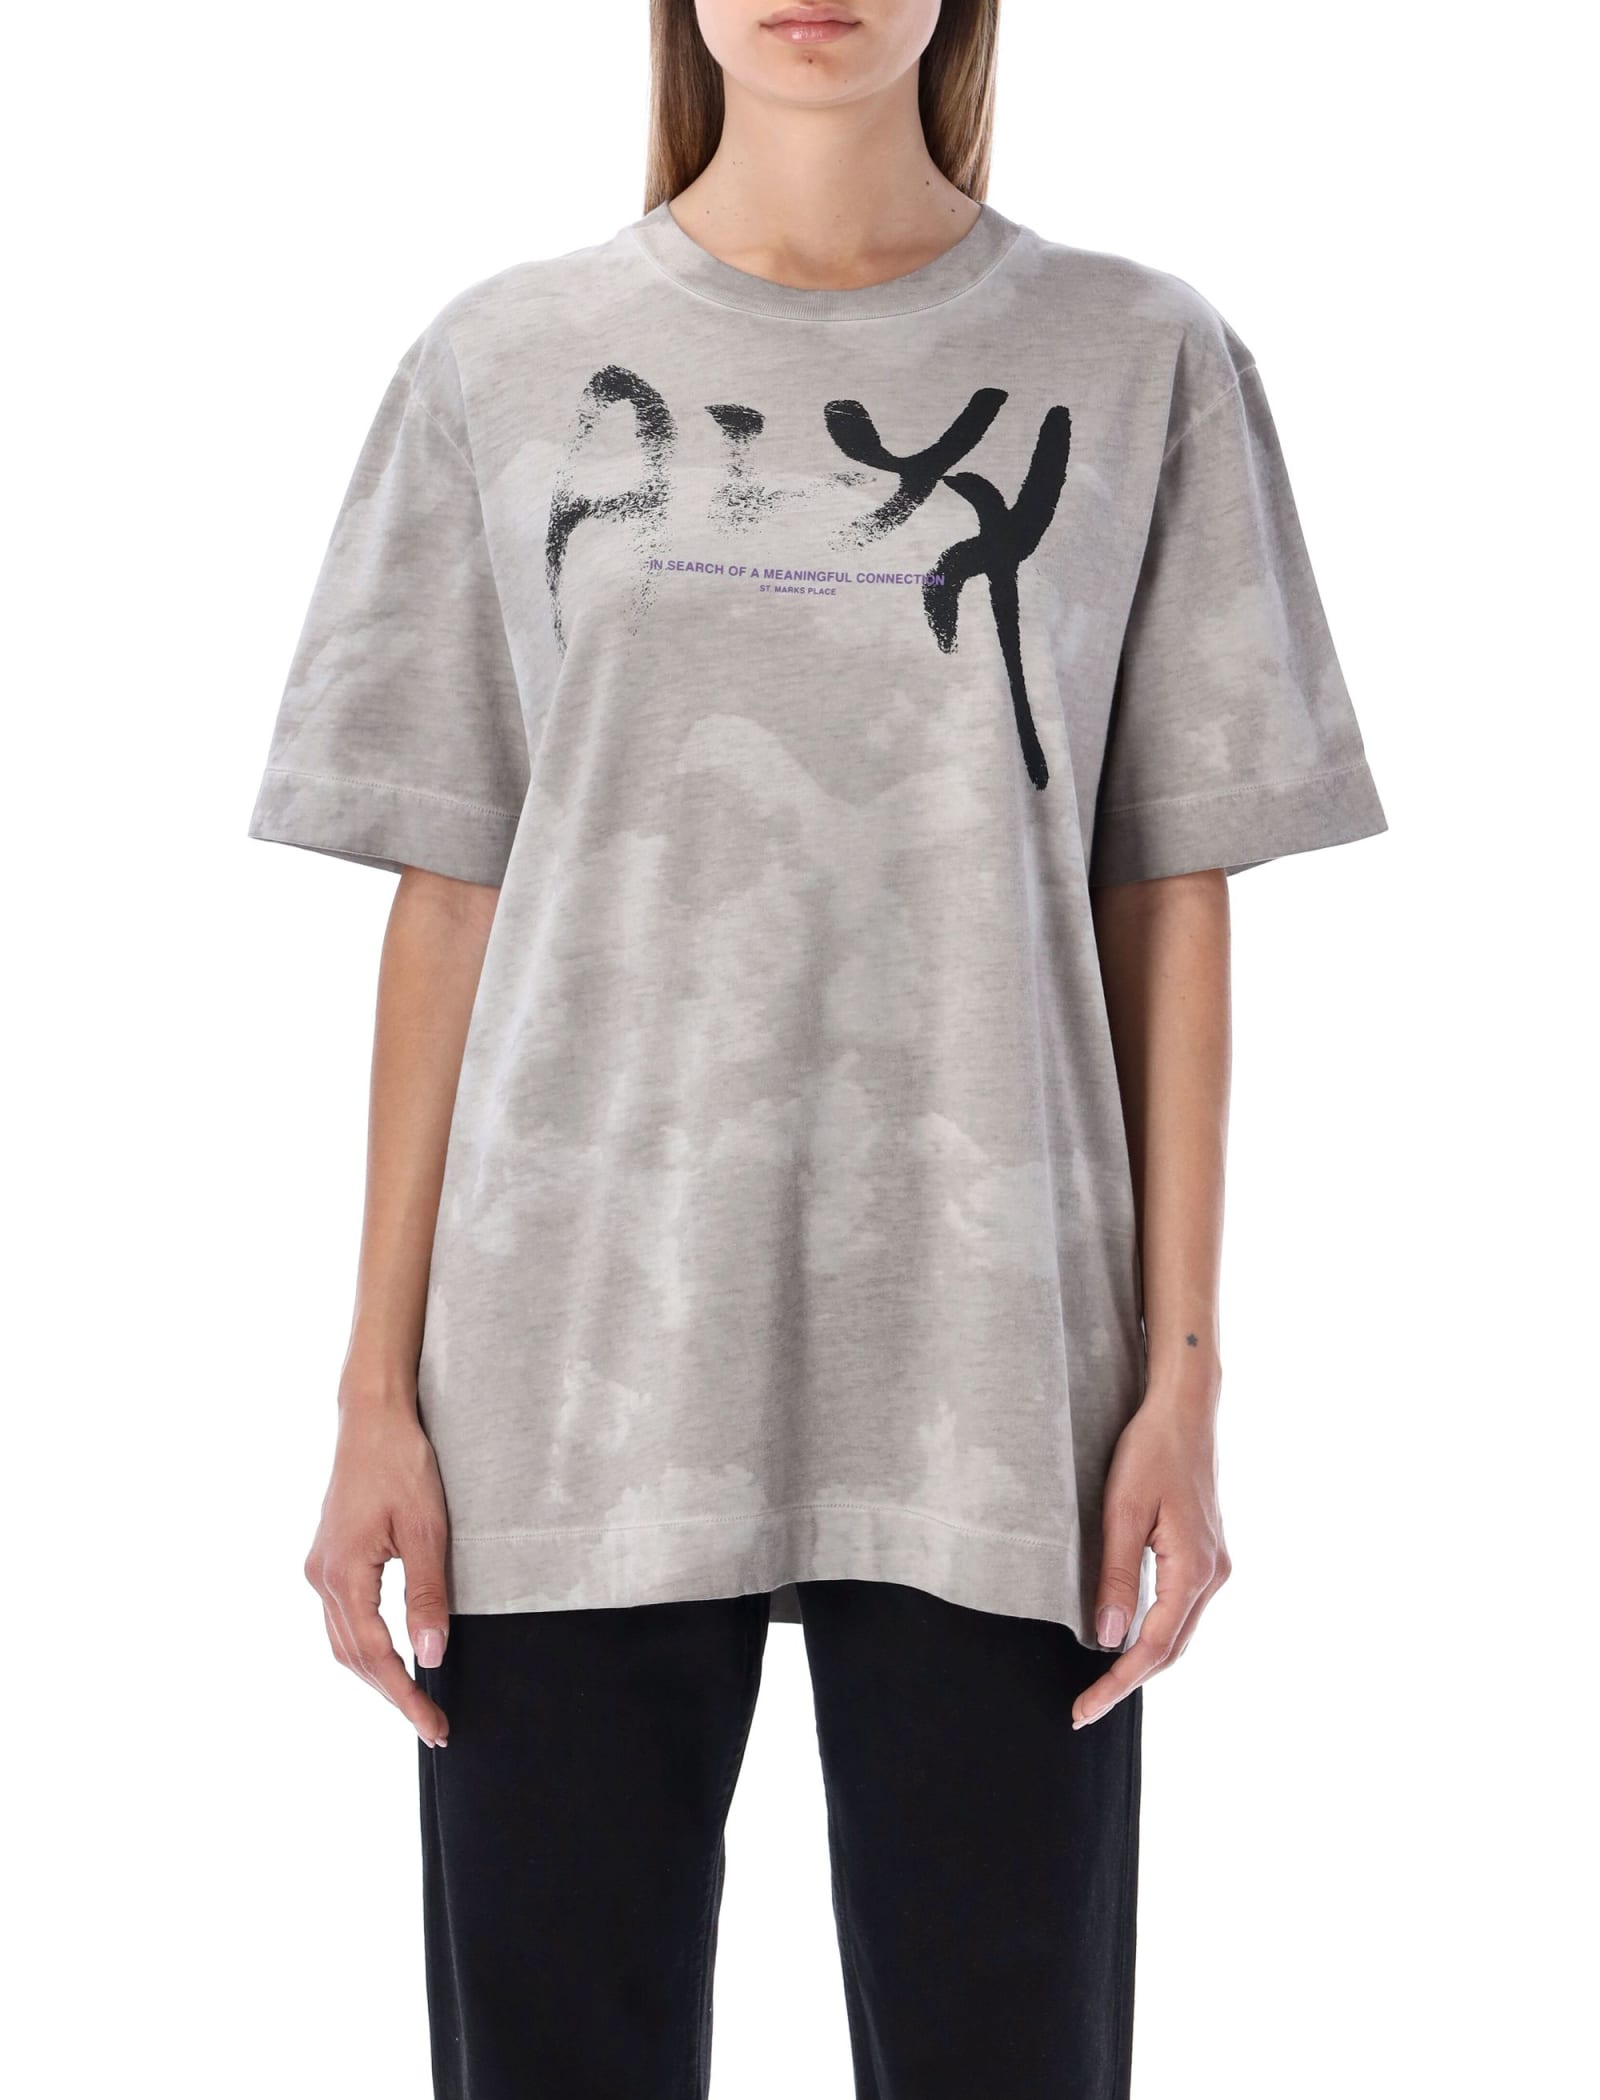 1017 ALYX 9SM Meaningful Connection Treated T-shirt